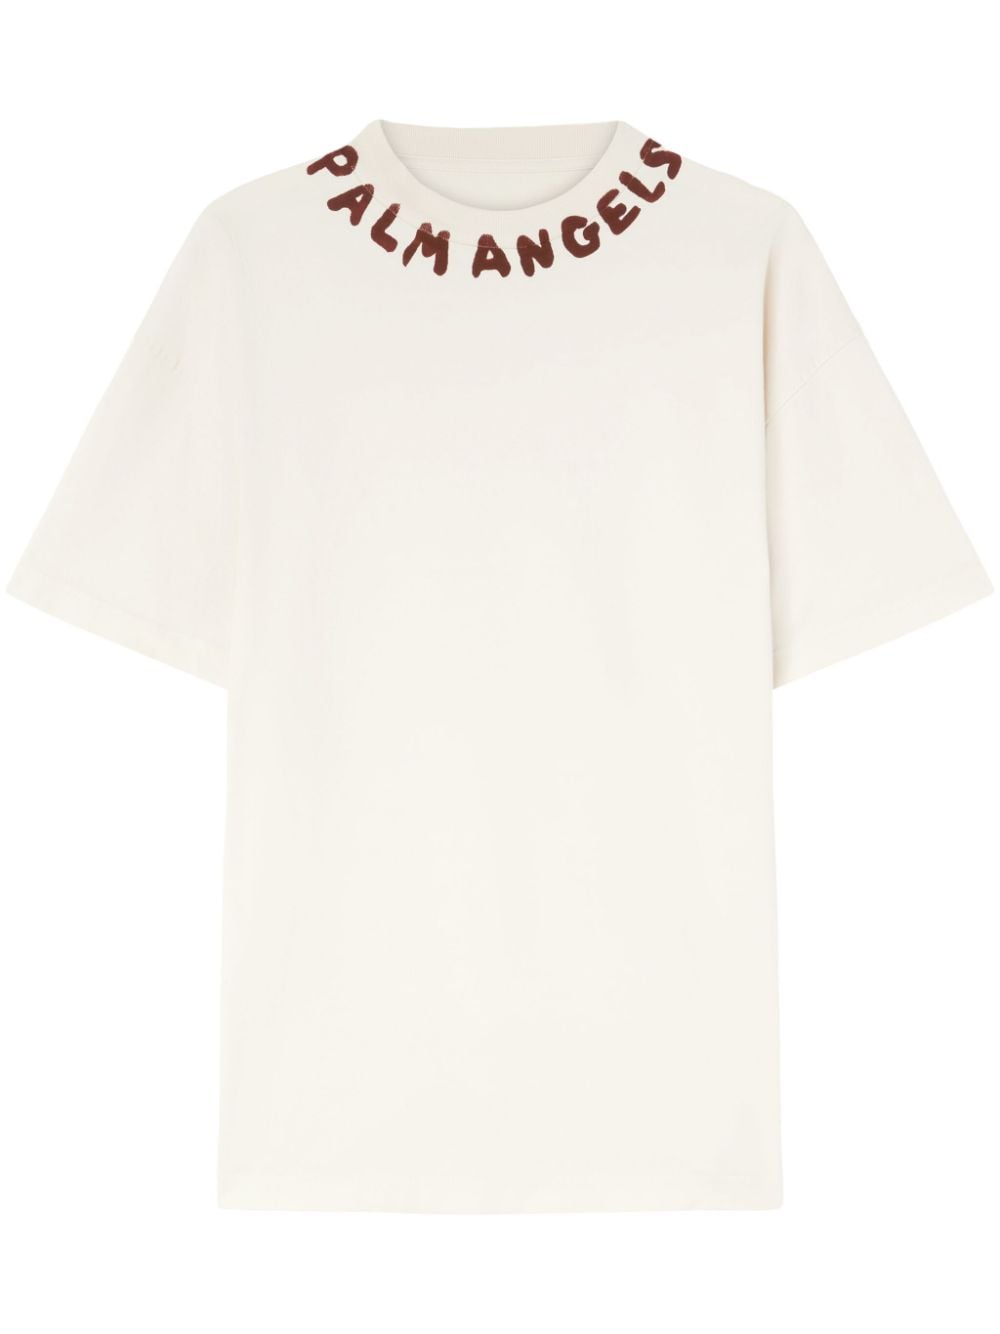 White t-shirt with logo on the neck